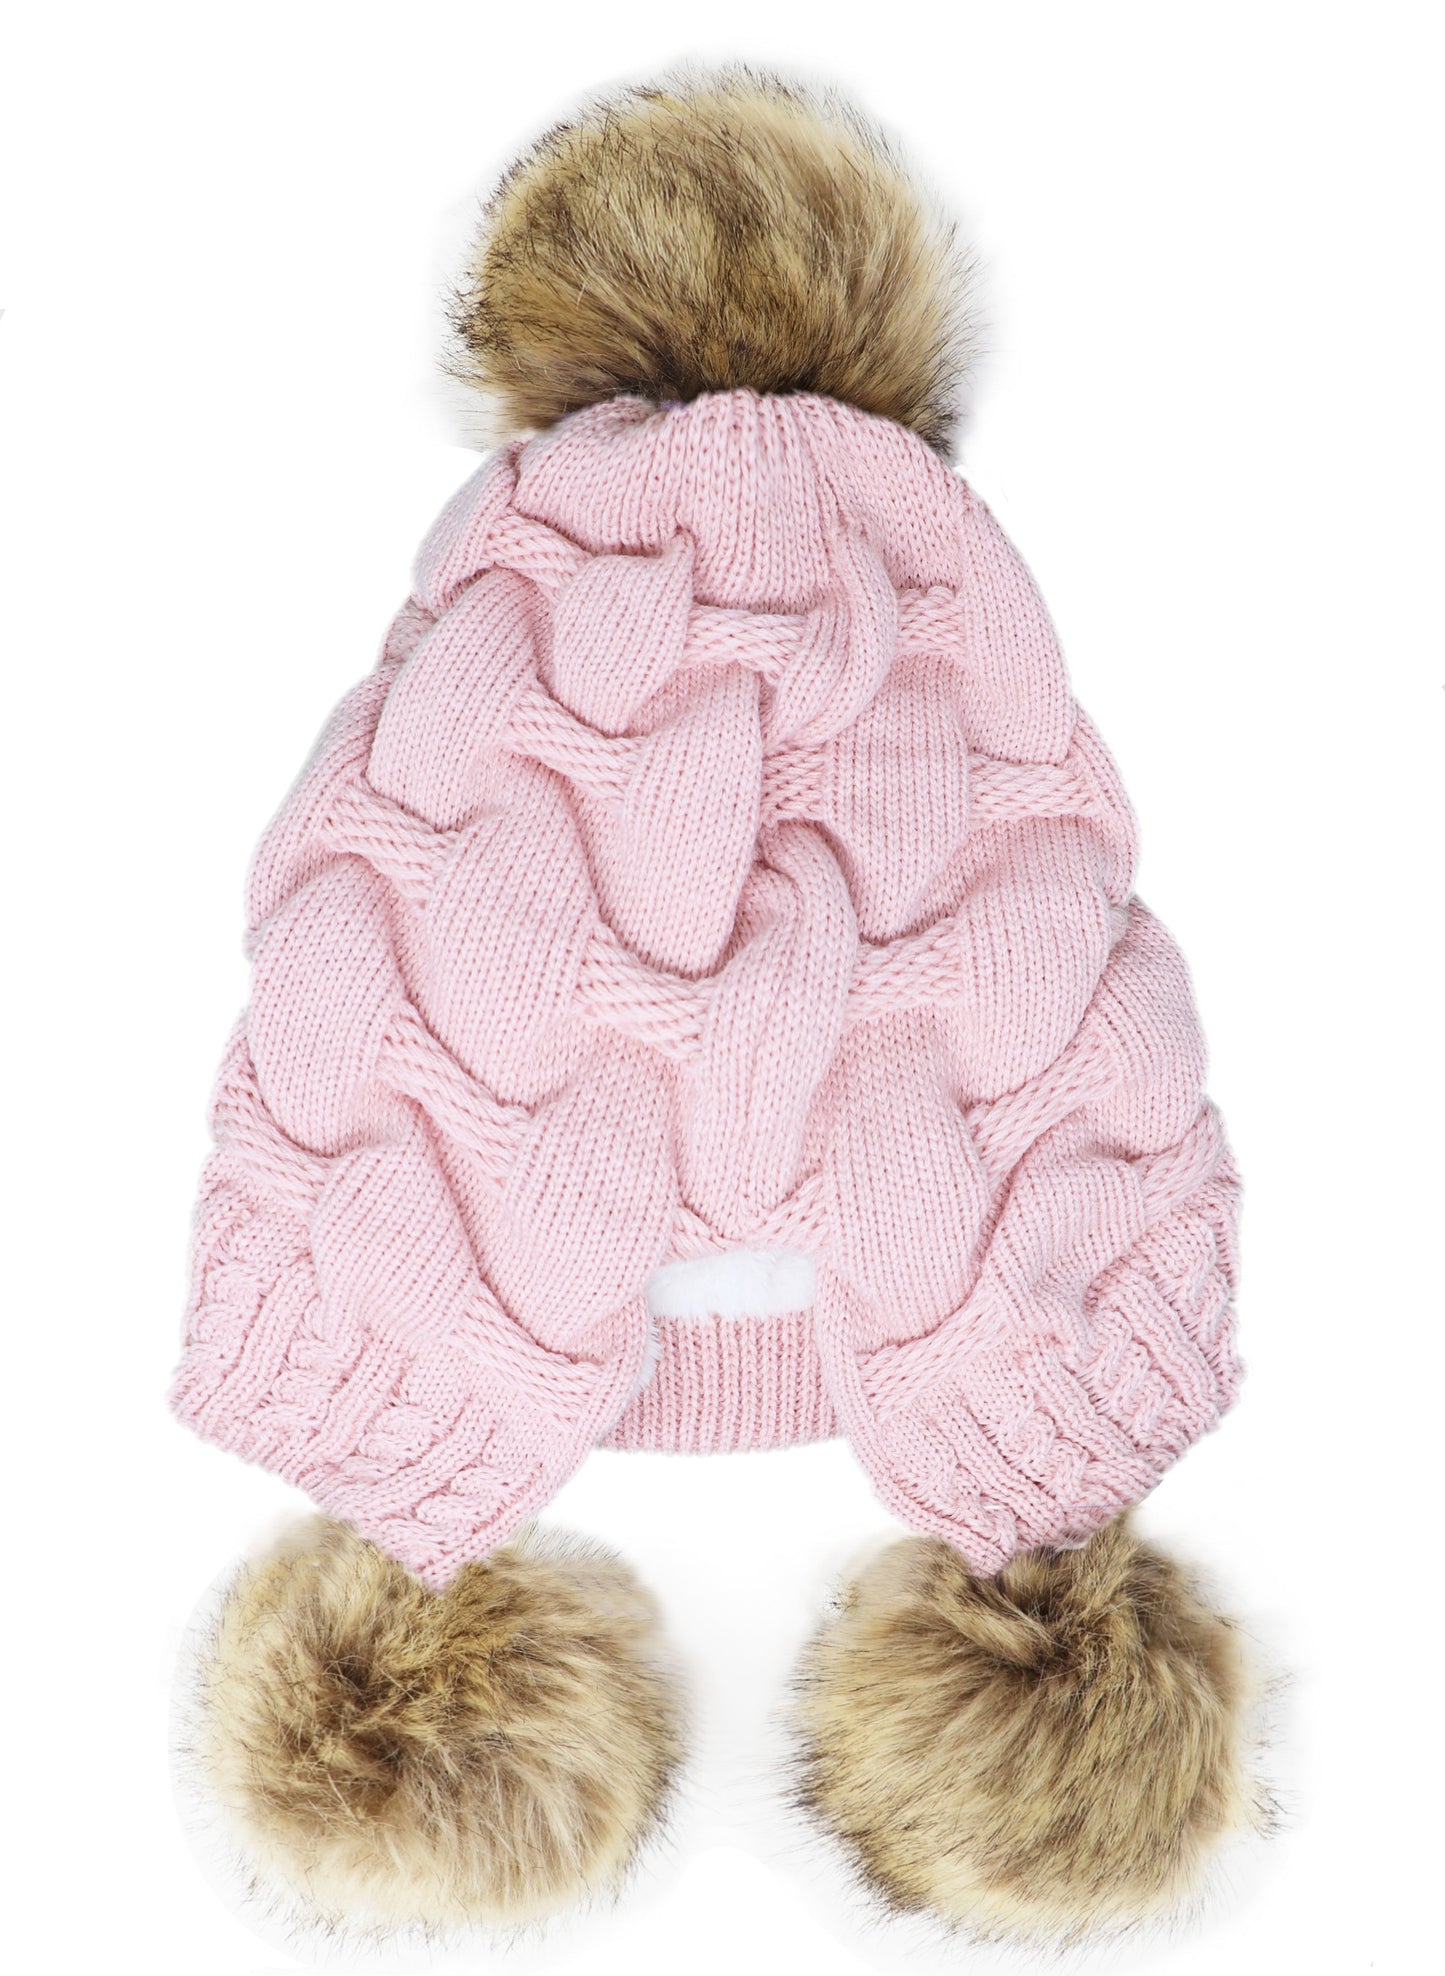 Scrunched Winter Pom Pom Knitted hat, One Size